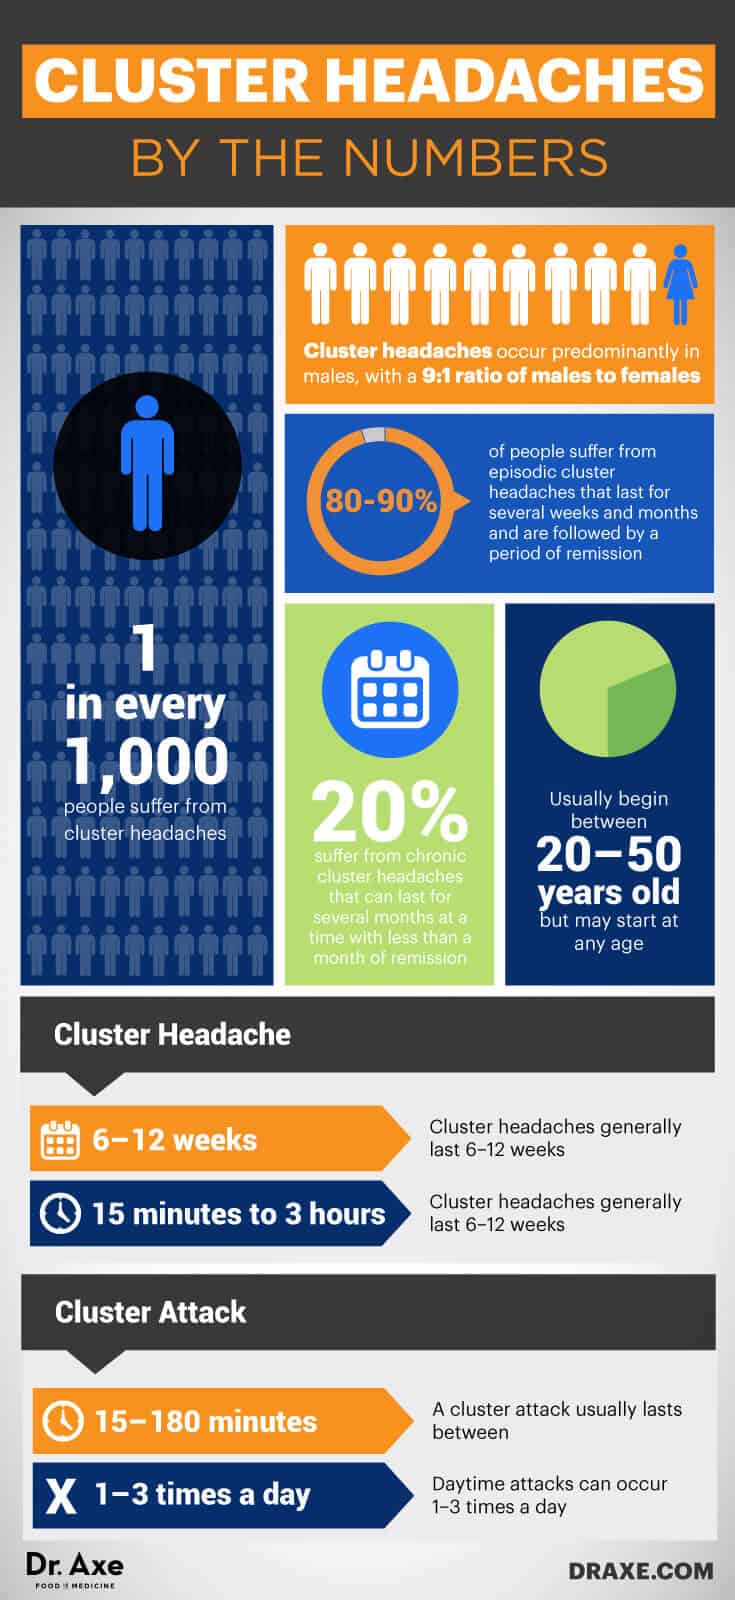 Cluster headaches by the numbers - Dr. Axe